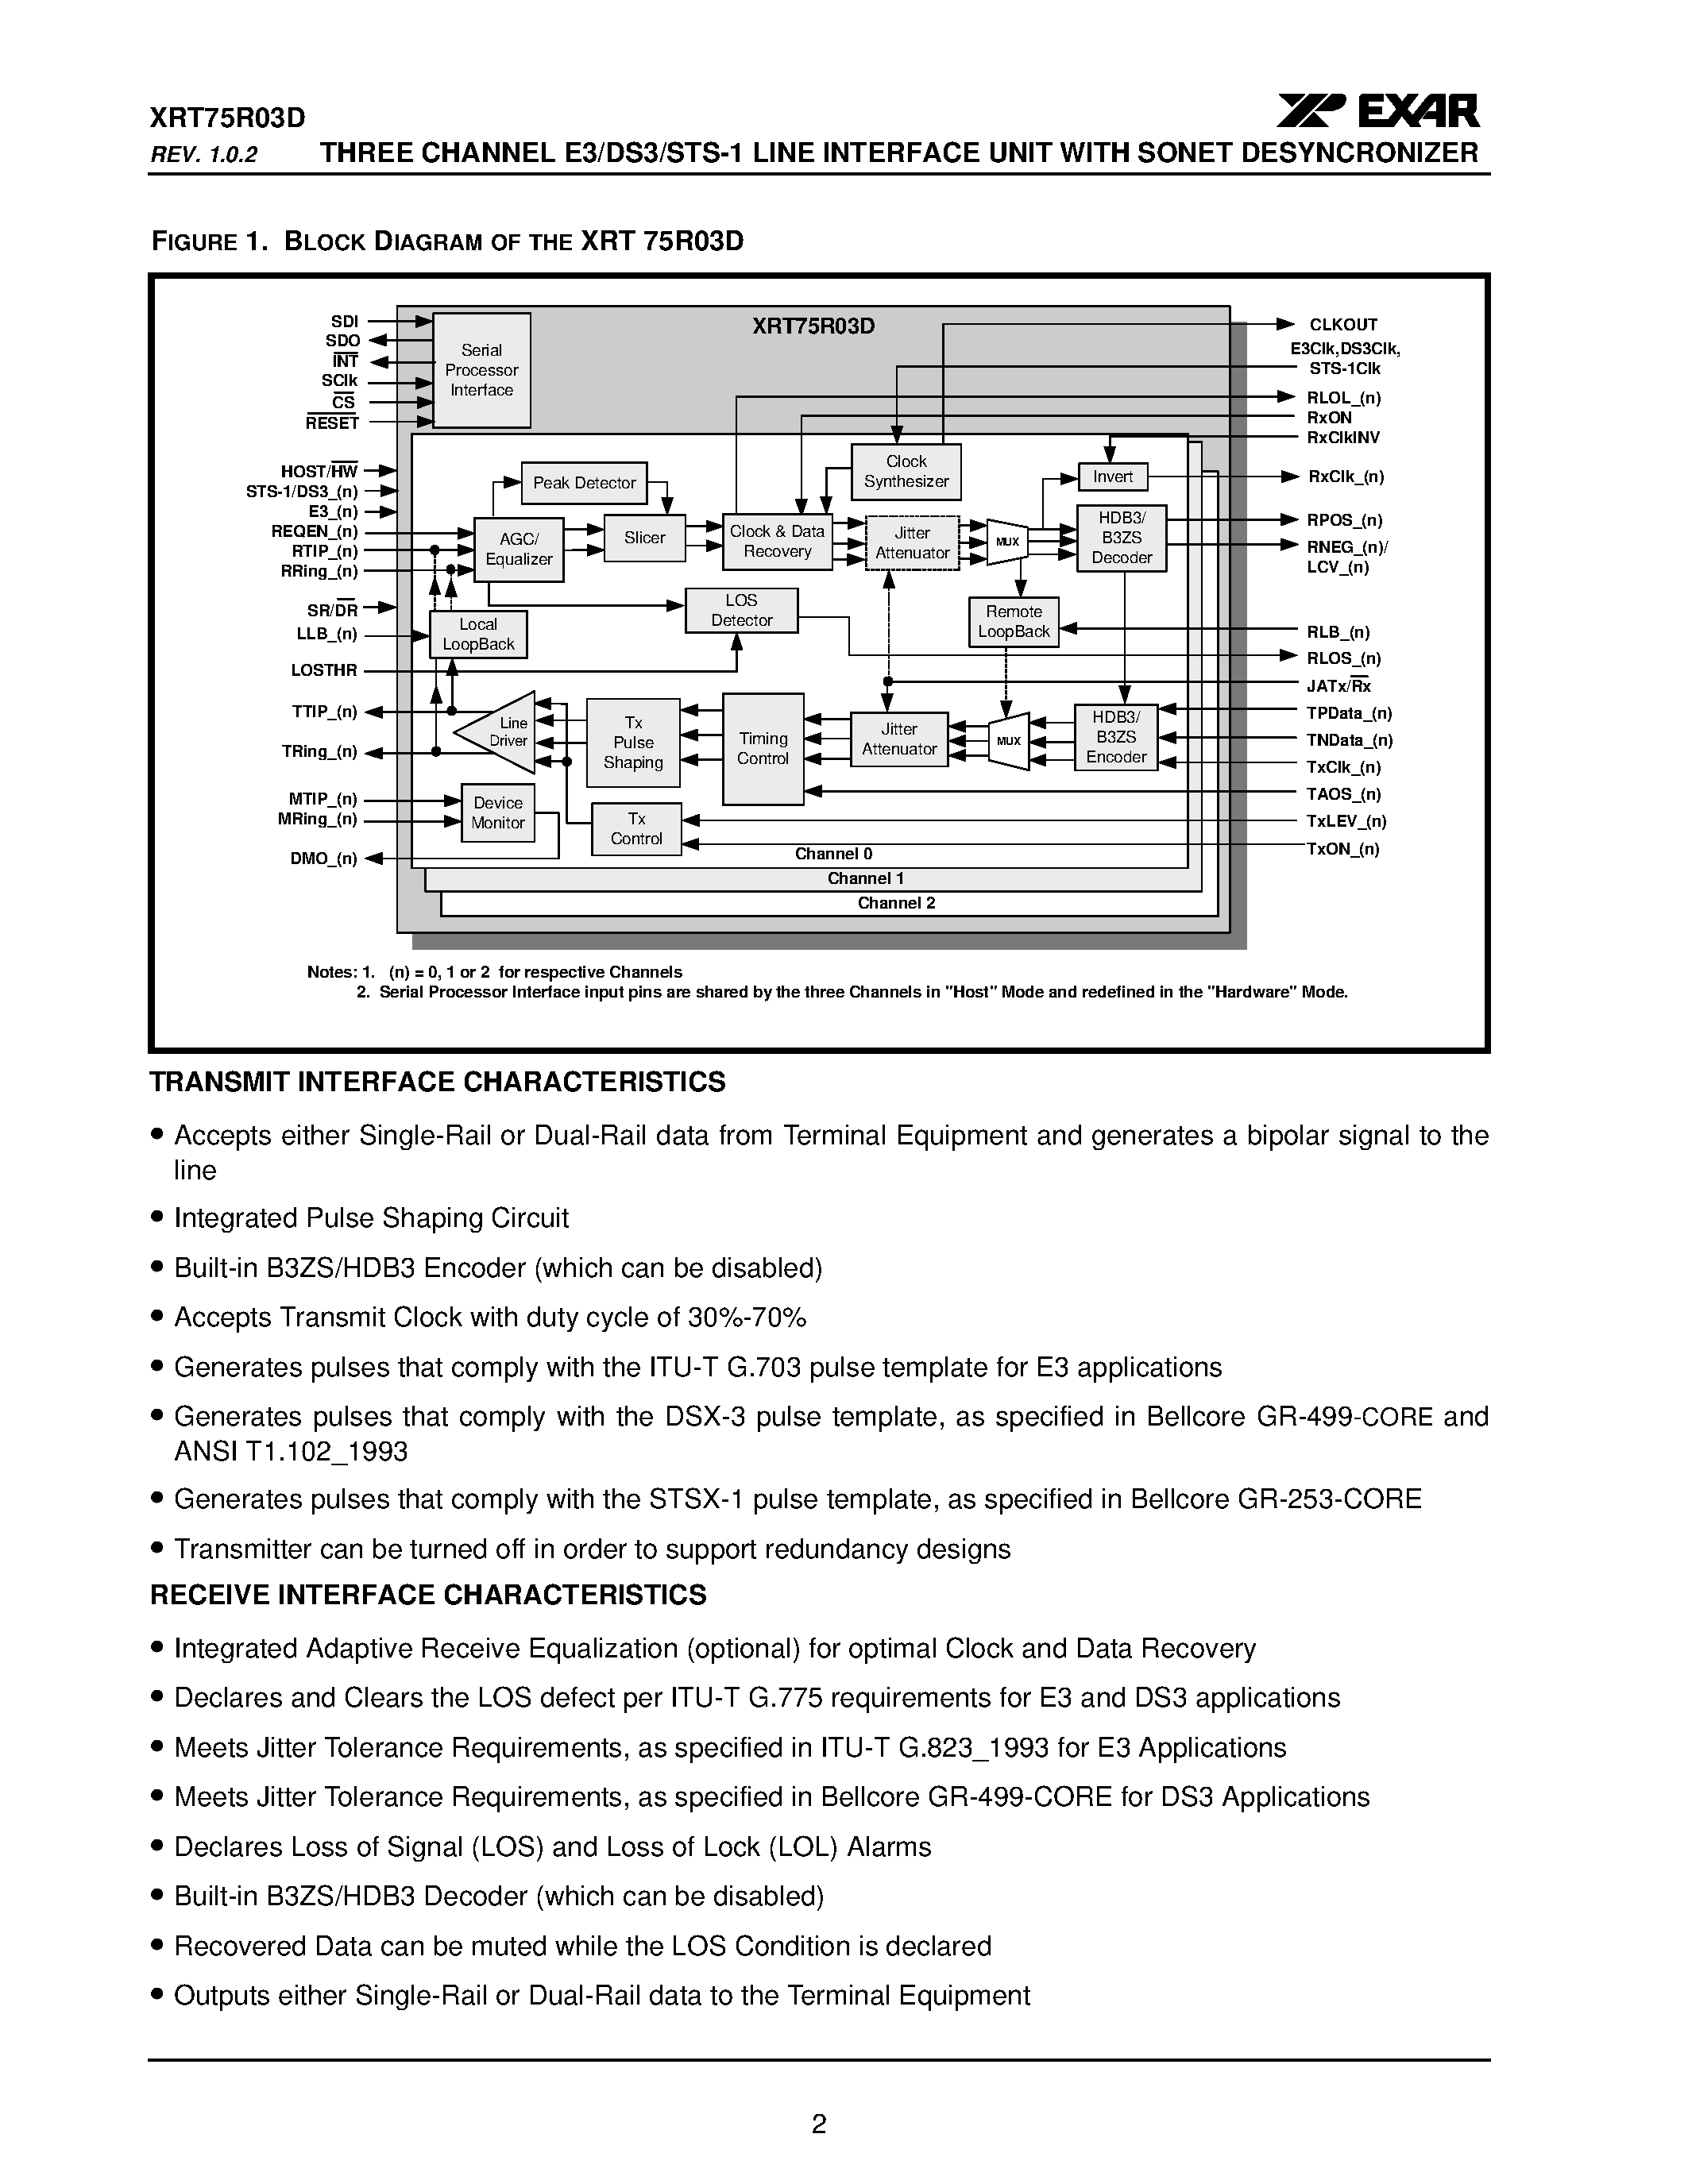 Datasheet XRT75R03D - THREE CHANNEL E3/DS3/STS-1 LINE INTERFACE UNIT page 2